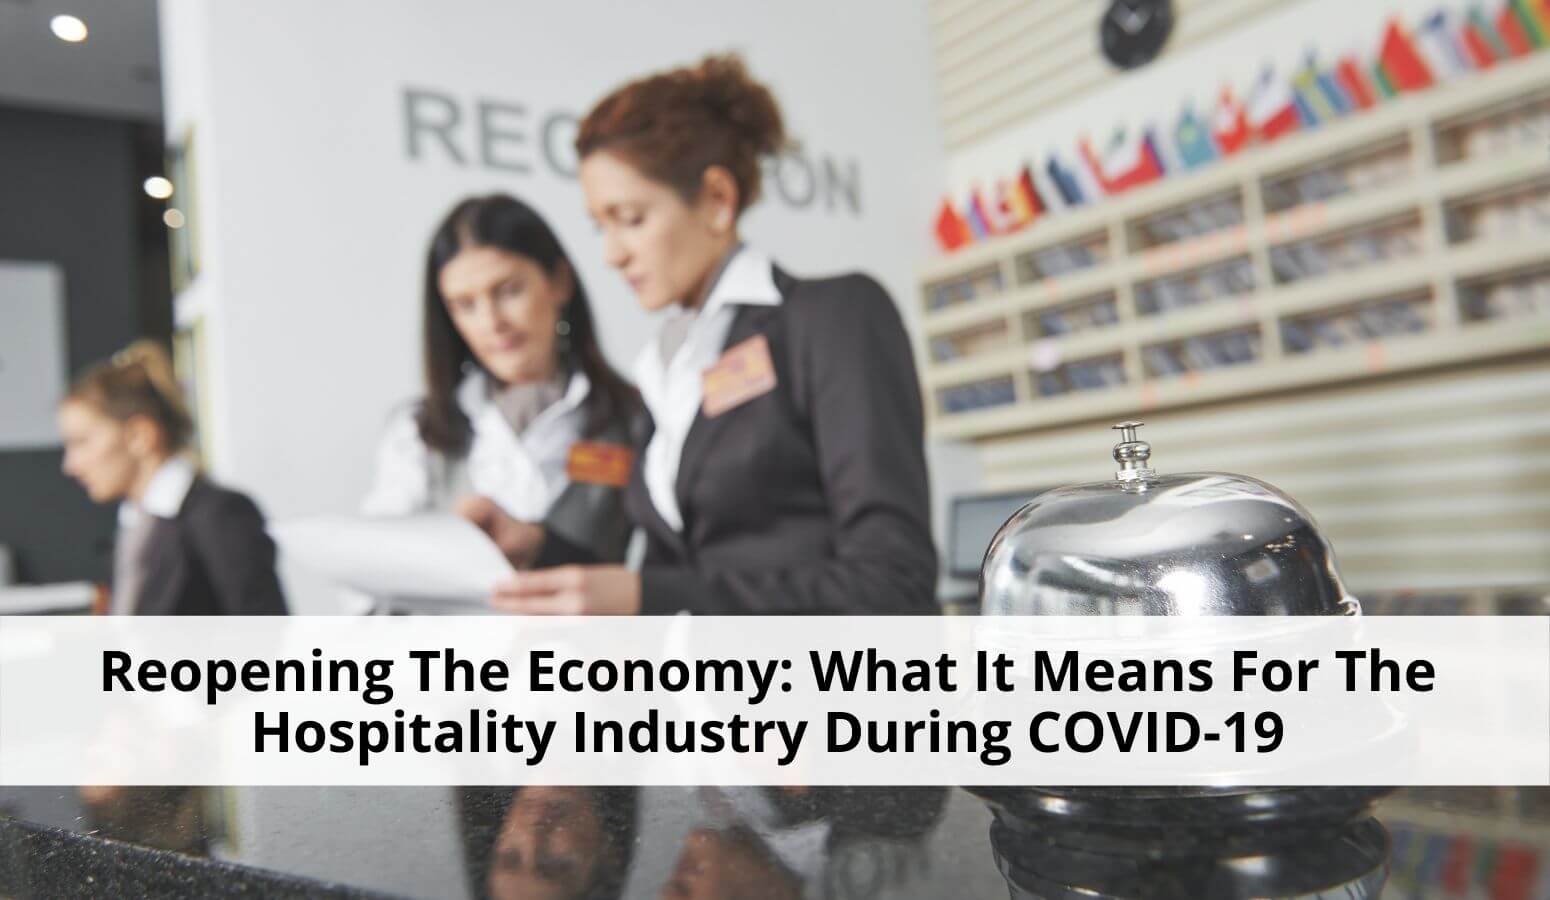 Featured image for “The Hospitality Industry During COVID-19: Reopening The Economy”